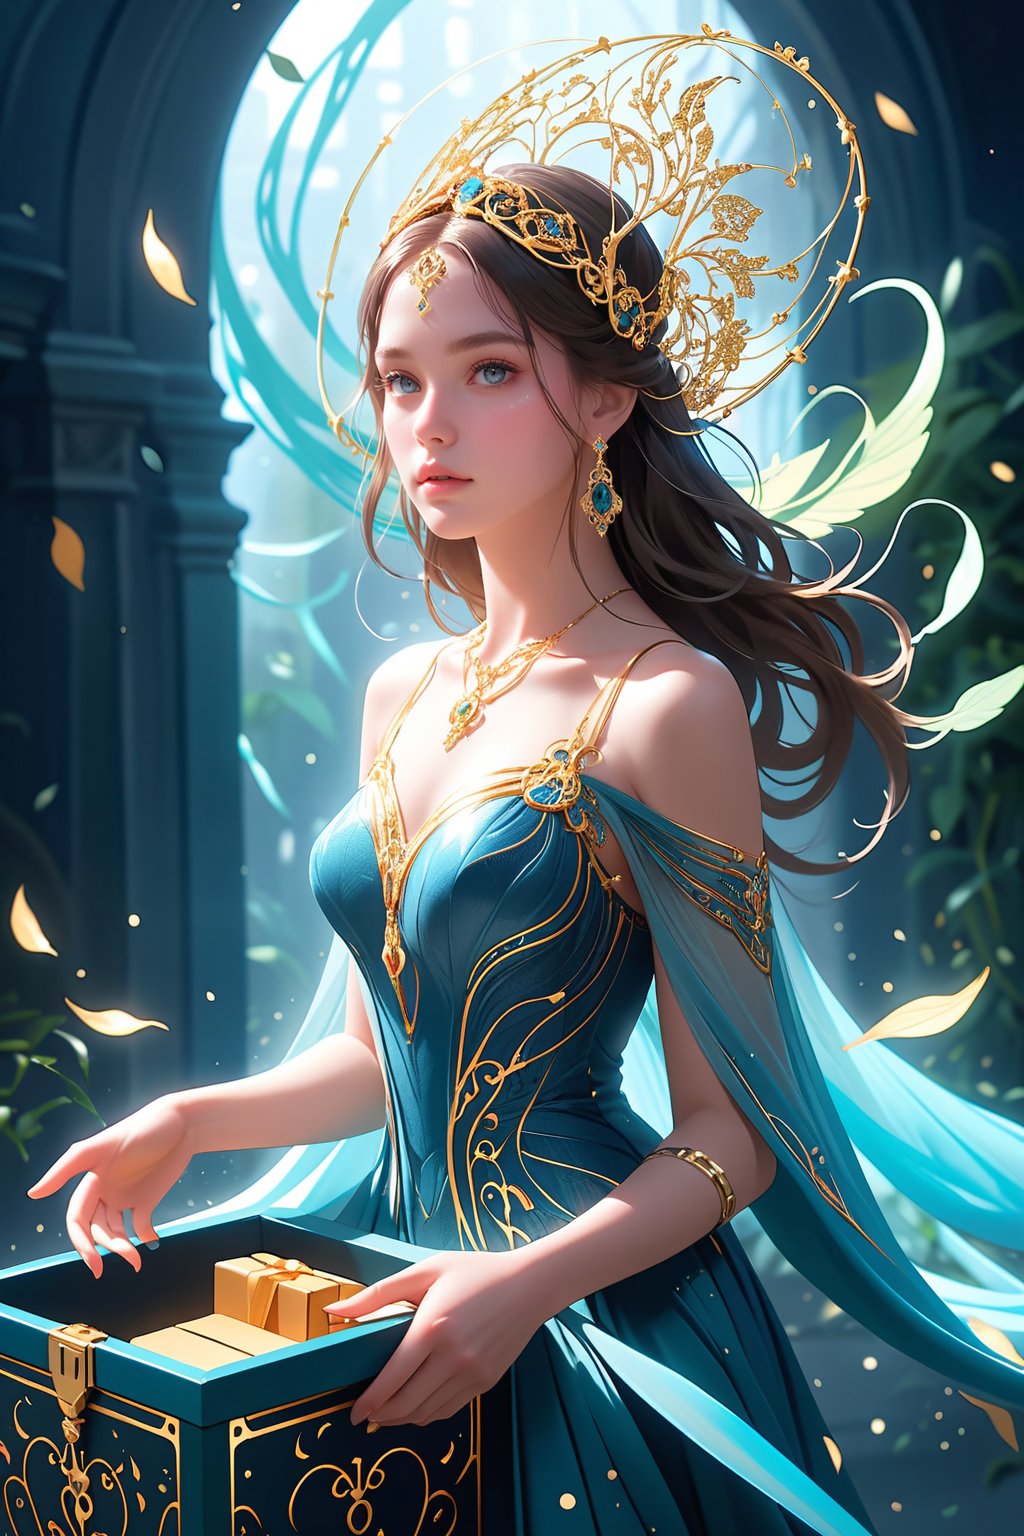 The beautiful Pandora, adorned in intricate jewelry and a flowing dress, eagerly reaching for the lid of the mysterious box, her eyes filled with wonder and anticipation.